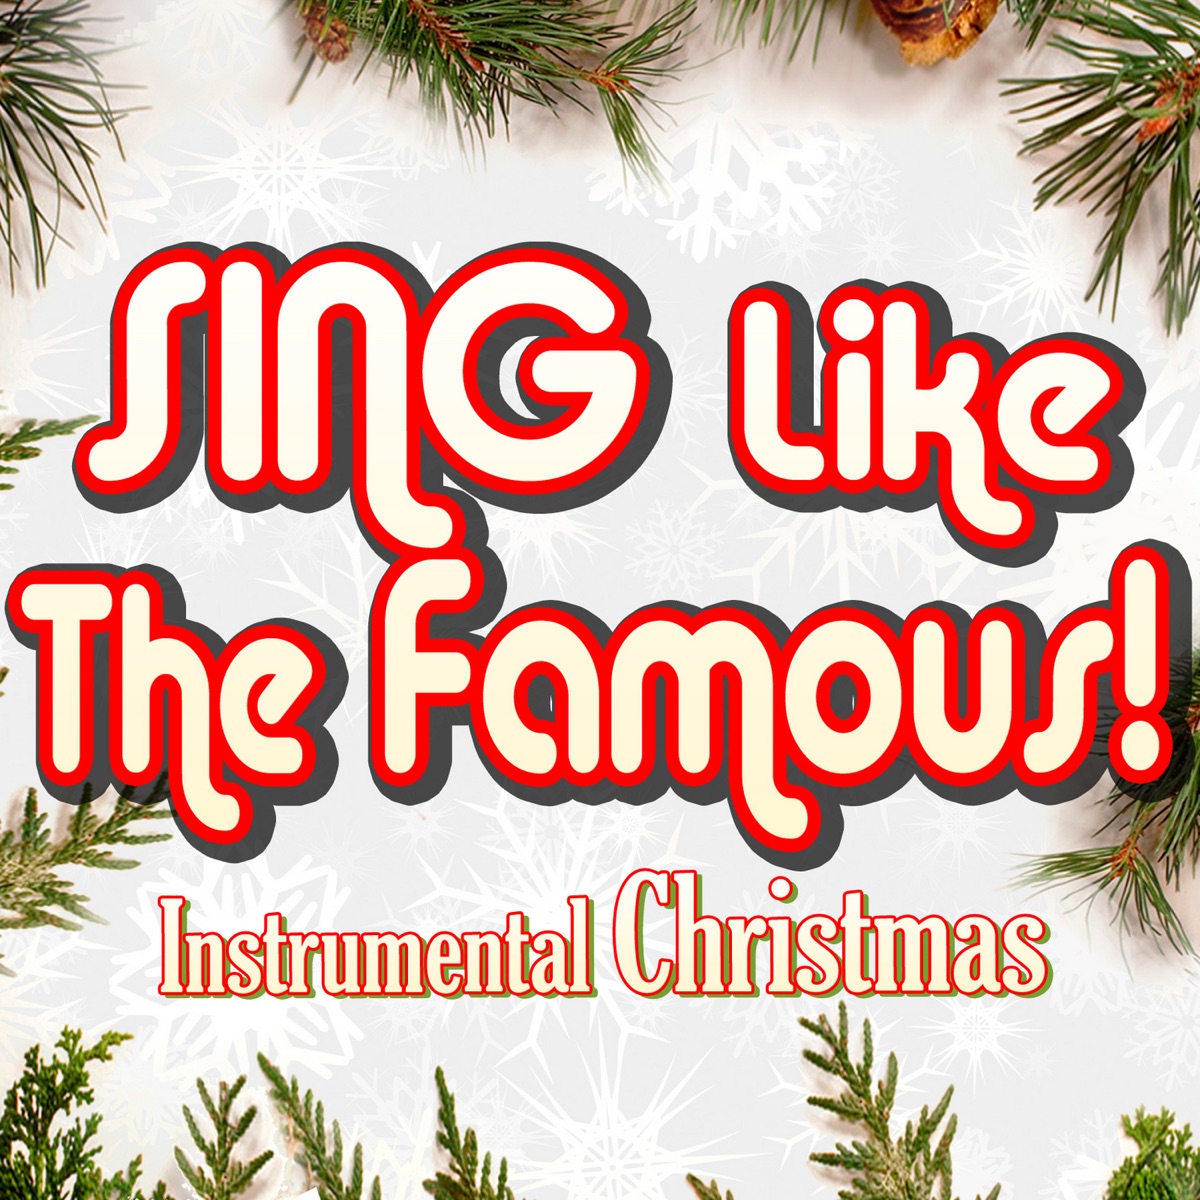 All I Want for Christmas Is You (Instrumental Karaoke) [Originally  Performed by Mariah Carey] - Single by Sing Like The Famous! on Apple Music